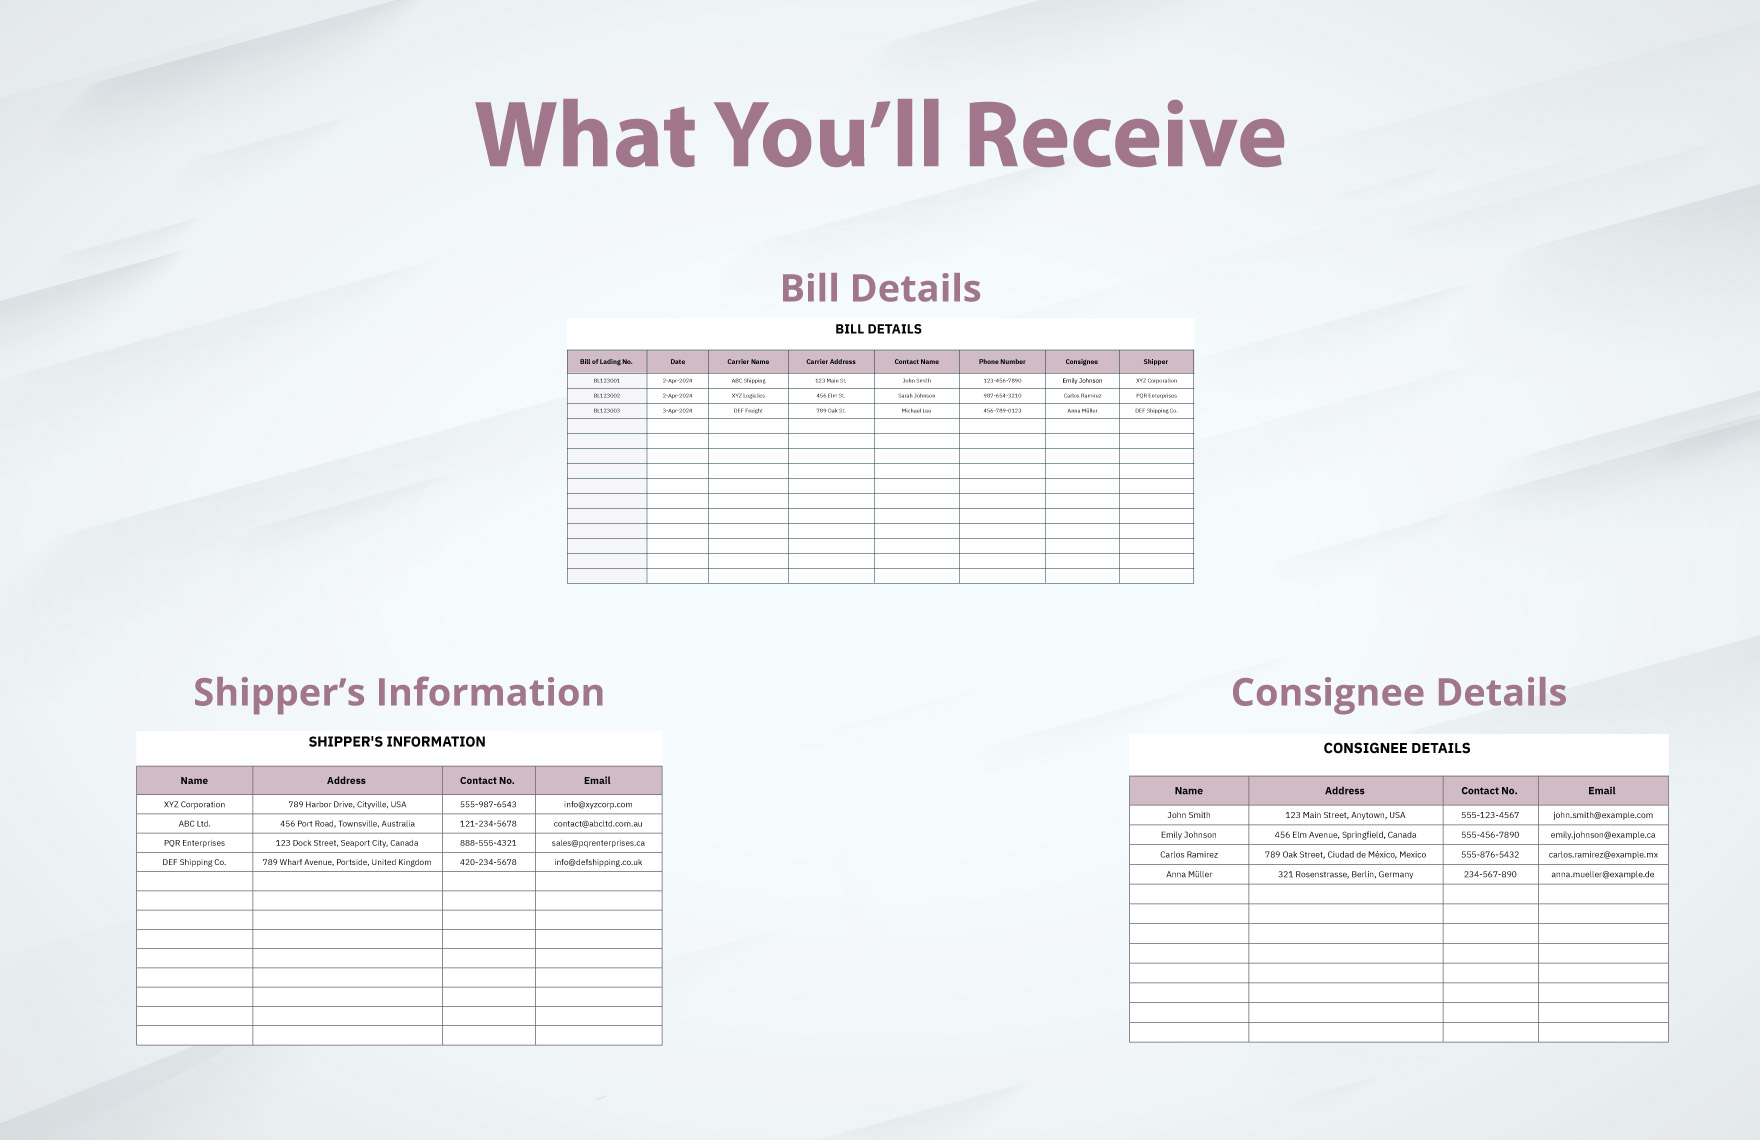 Generic Bill of Lading Template